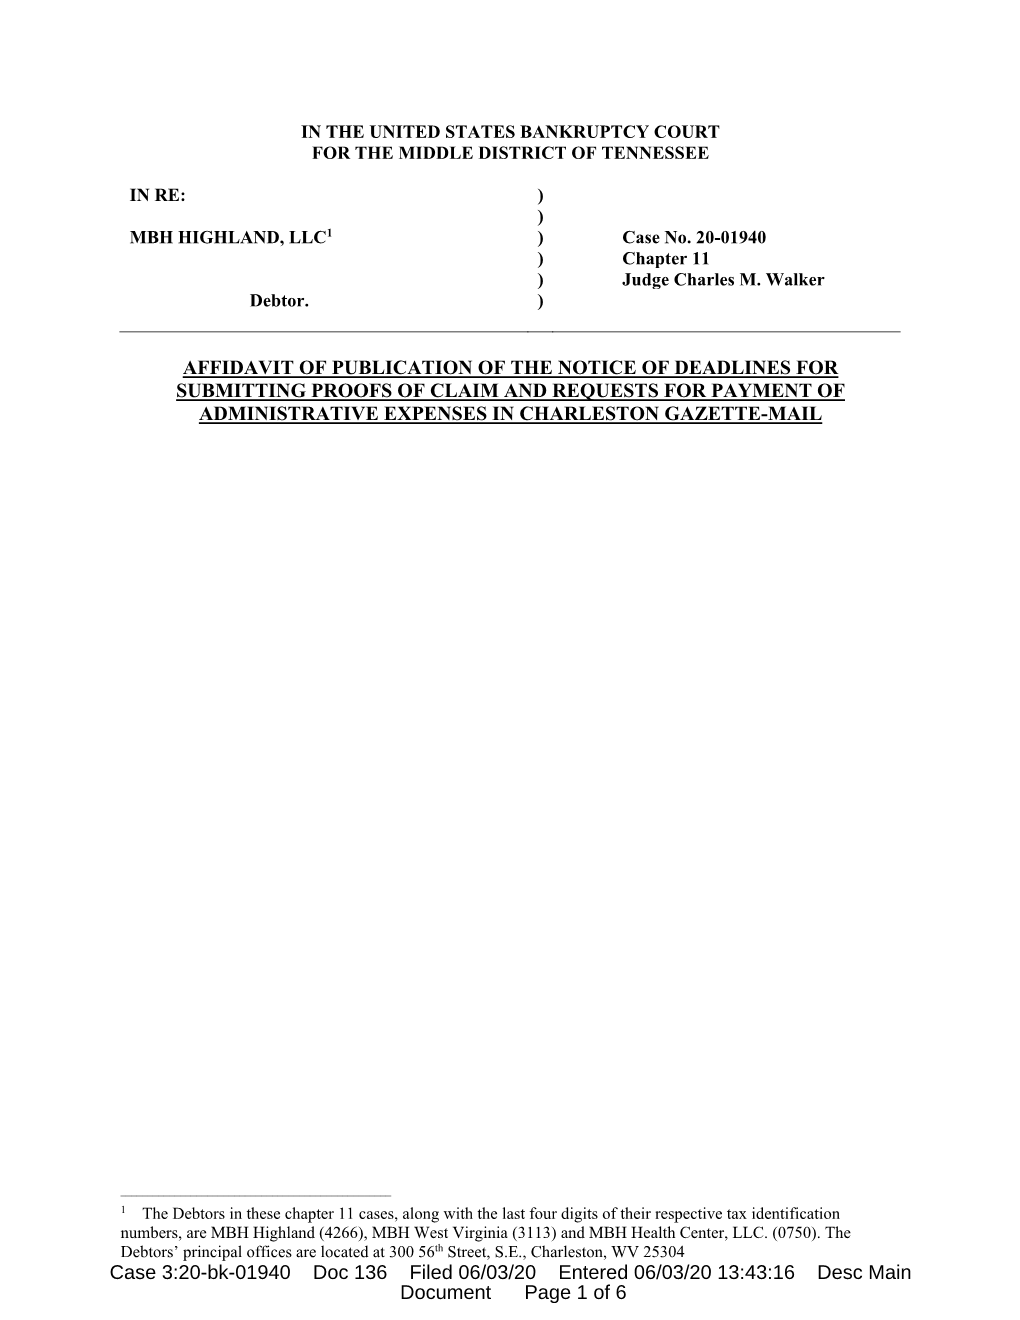 Affidavit of Publication of the Notice of Deadlines for Submitting Proofs of Claim and Requests for Payment of Administrative Expenses in Charleston Gazette-Mail